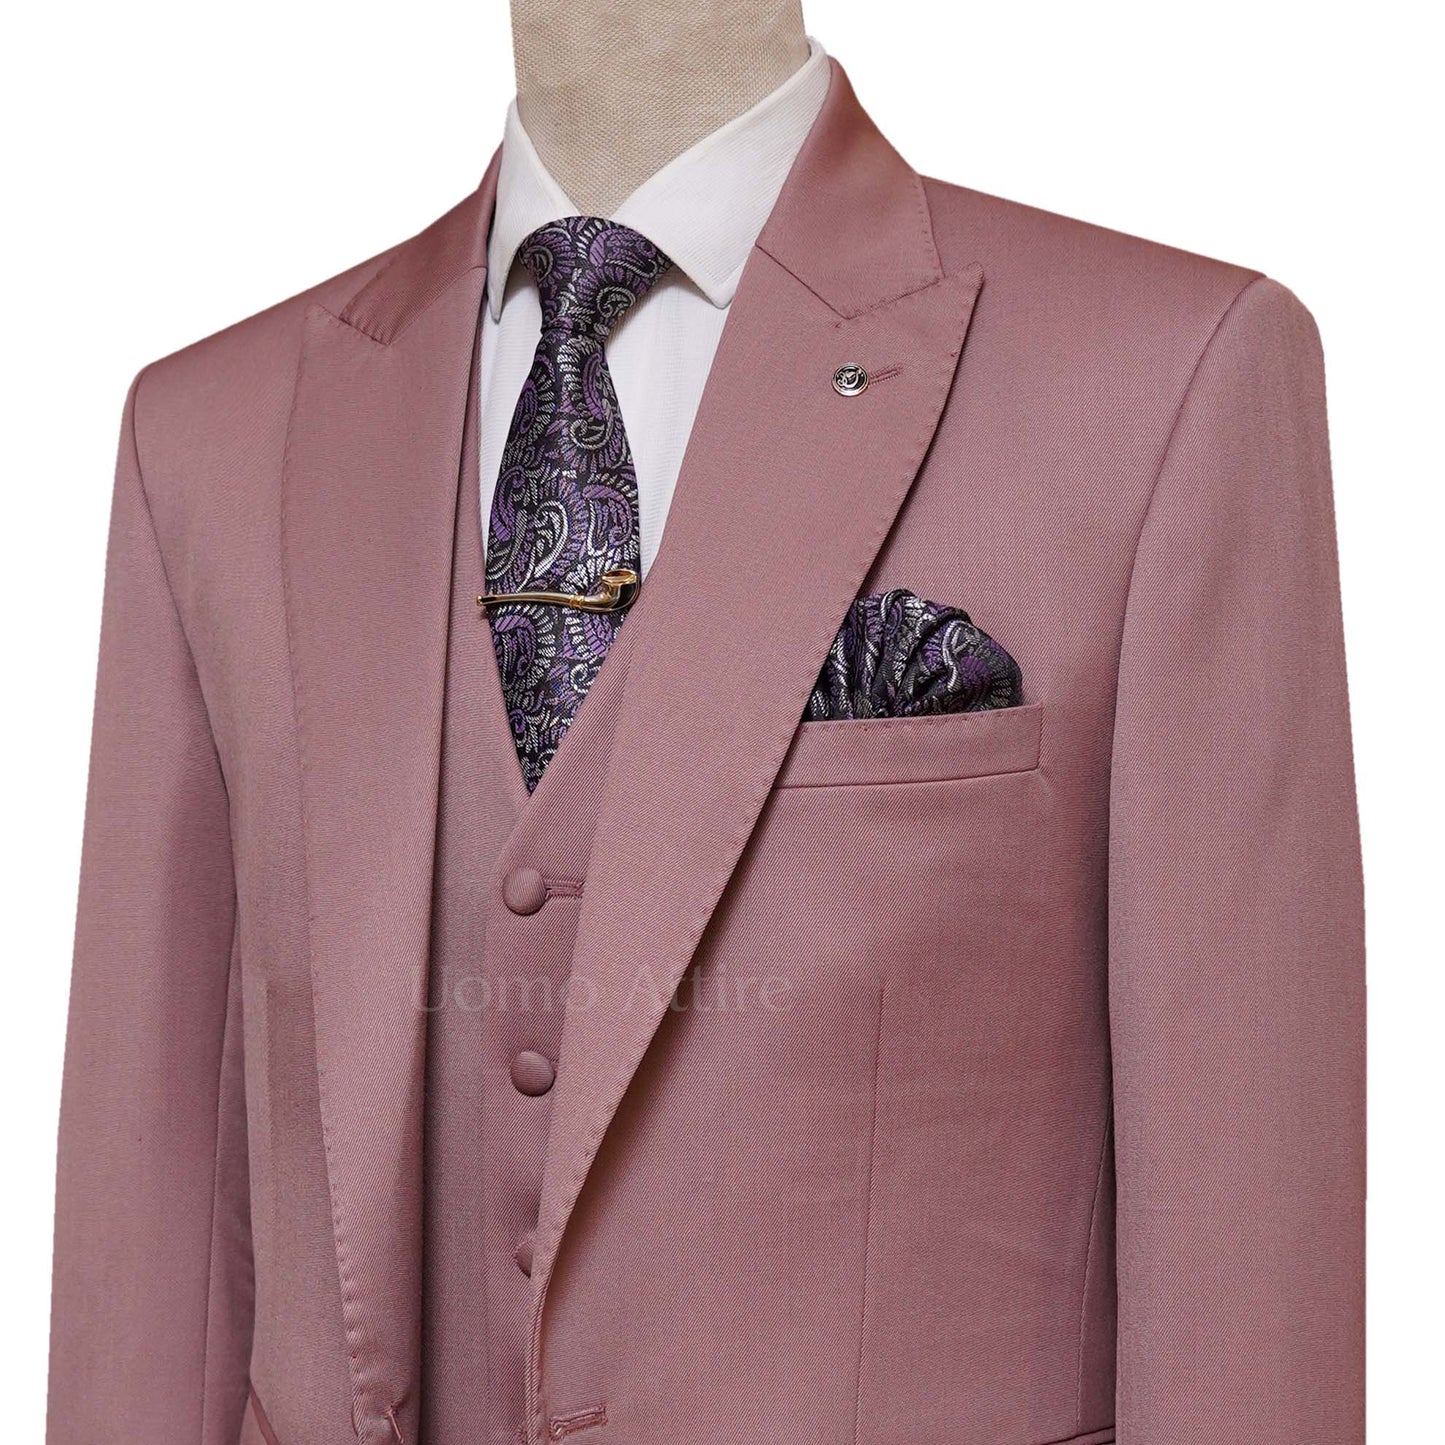 
                  
                    Light Pink Men's 3 Piece Suit for Special Occasions with formal tie and pocket square | Light Pink Suit
                  
                